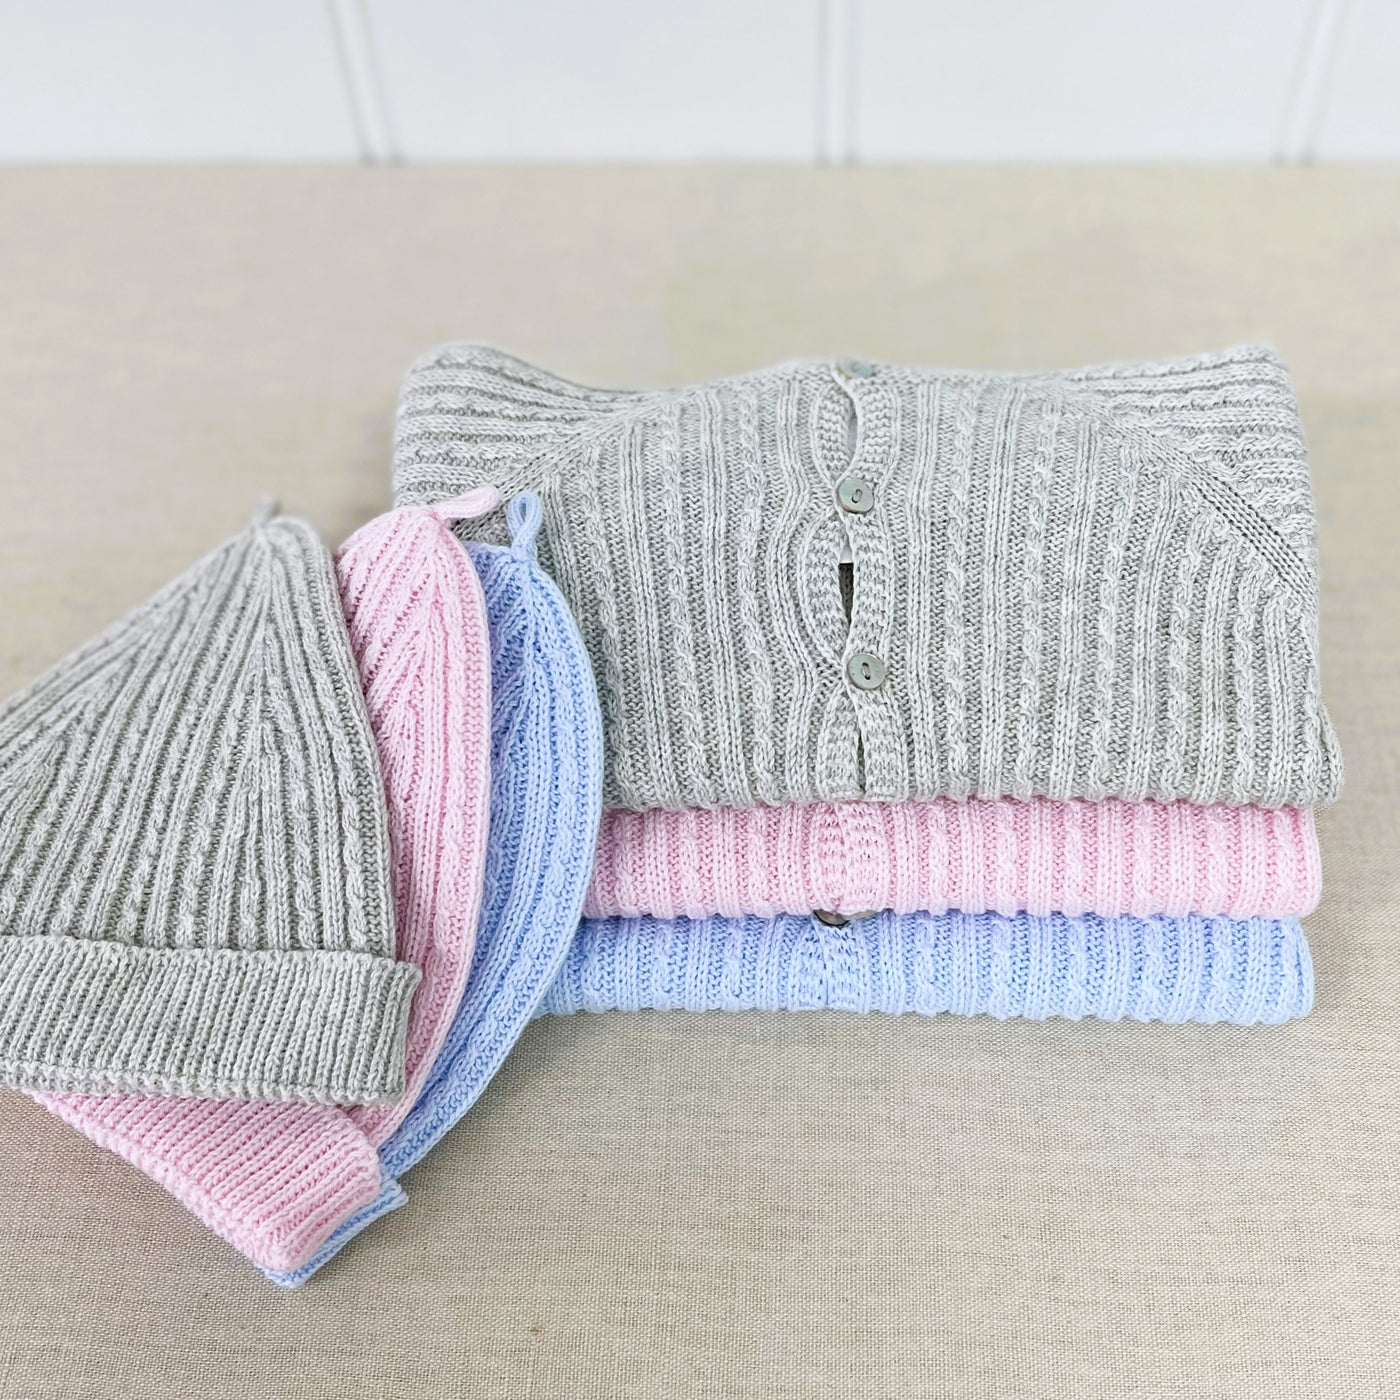 Cable Knit Hat Pink